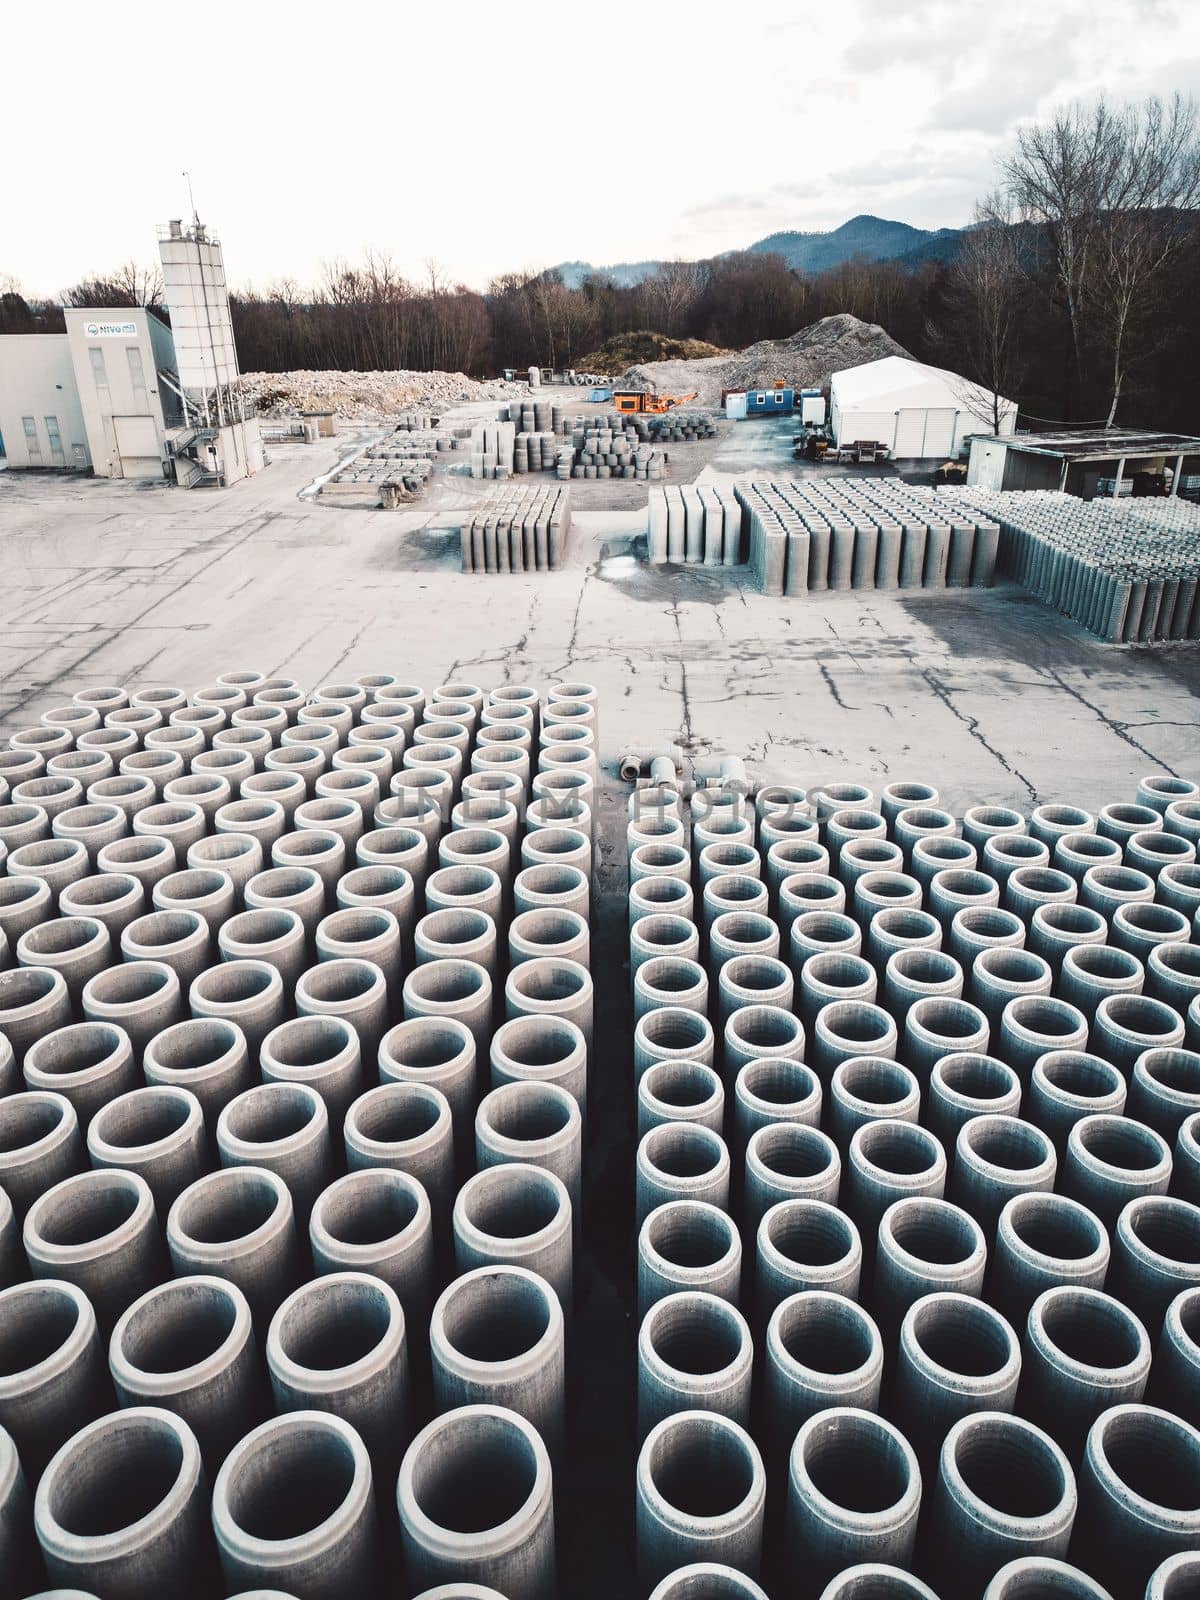 Pipe concrete manholes are stored on the ground ready for construction, for draining storm water, industrial background. High quality photo